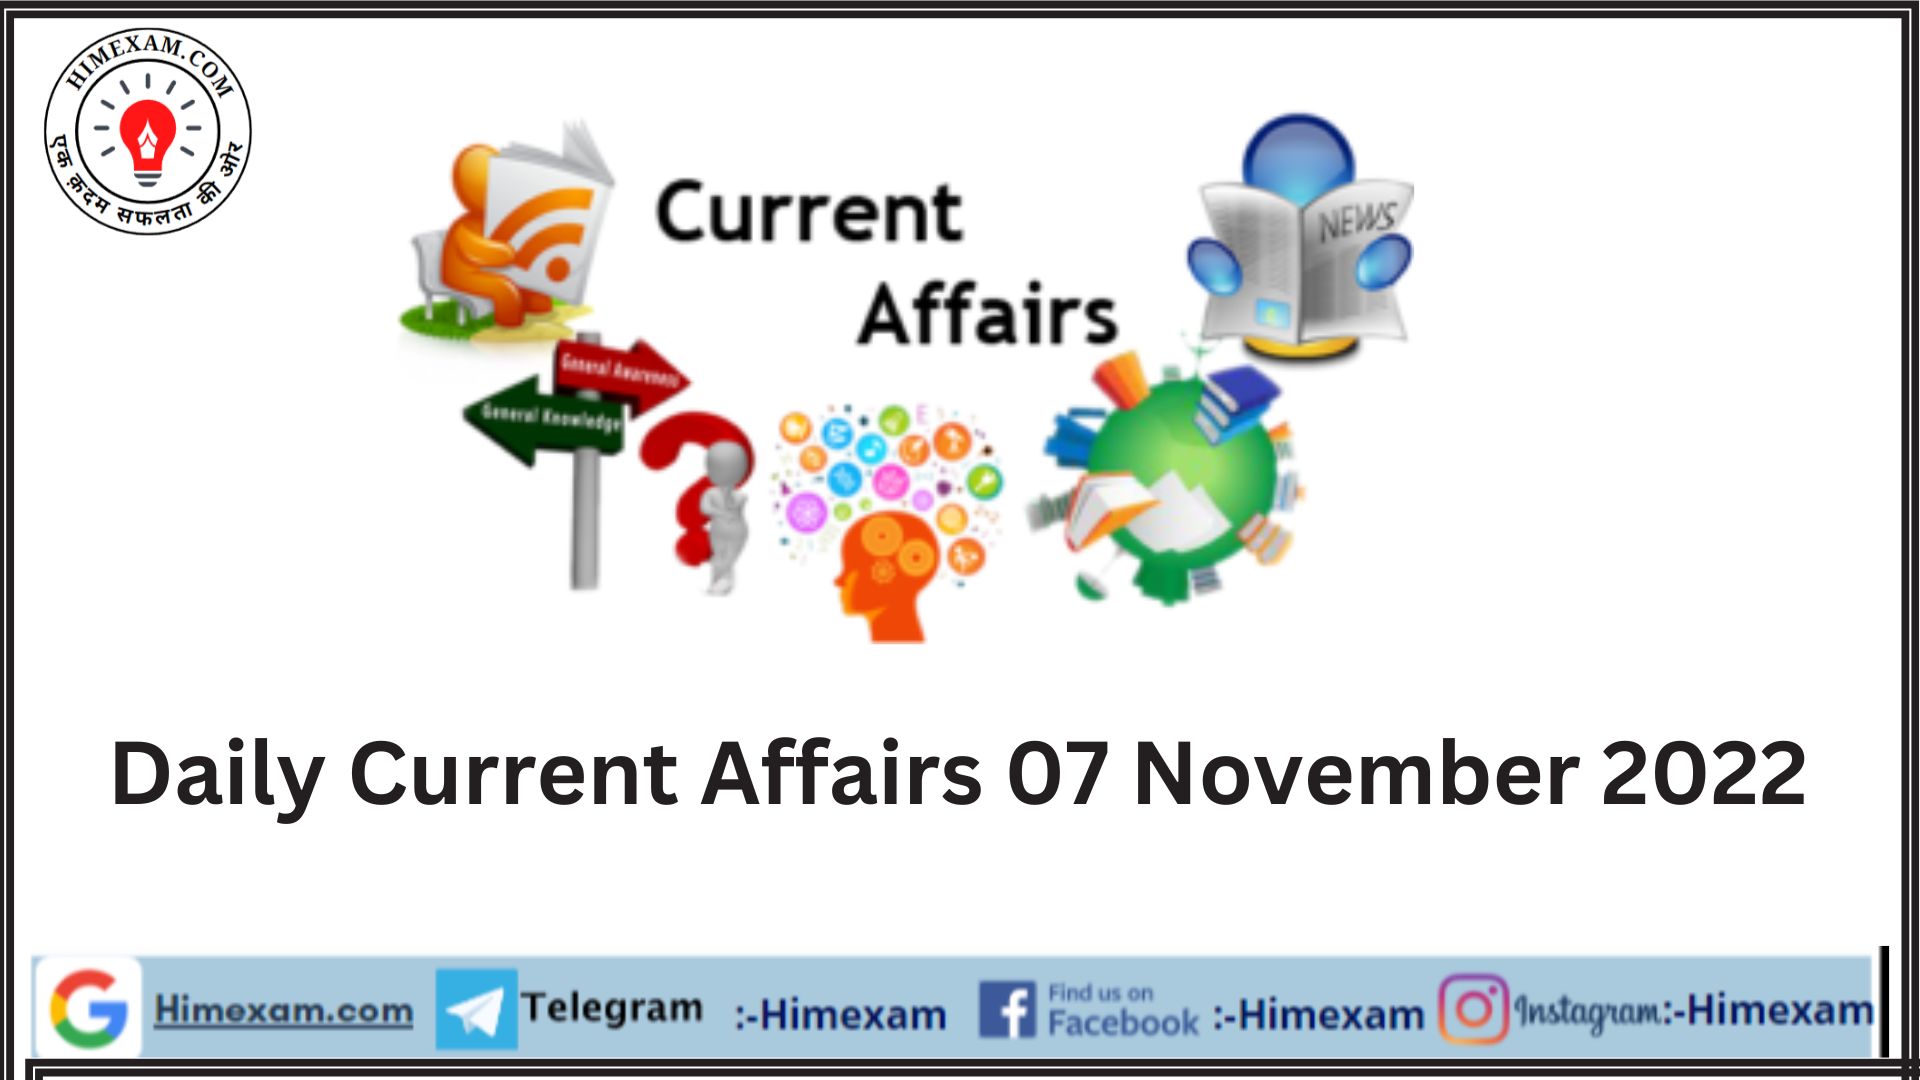 Daily Current Affairs 07 November 2022